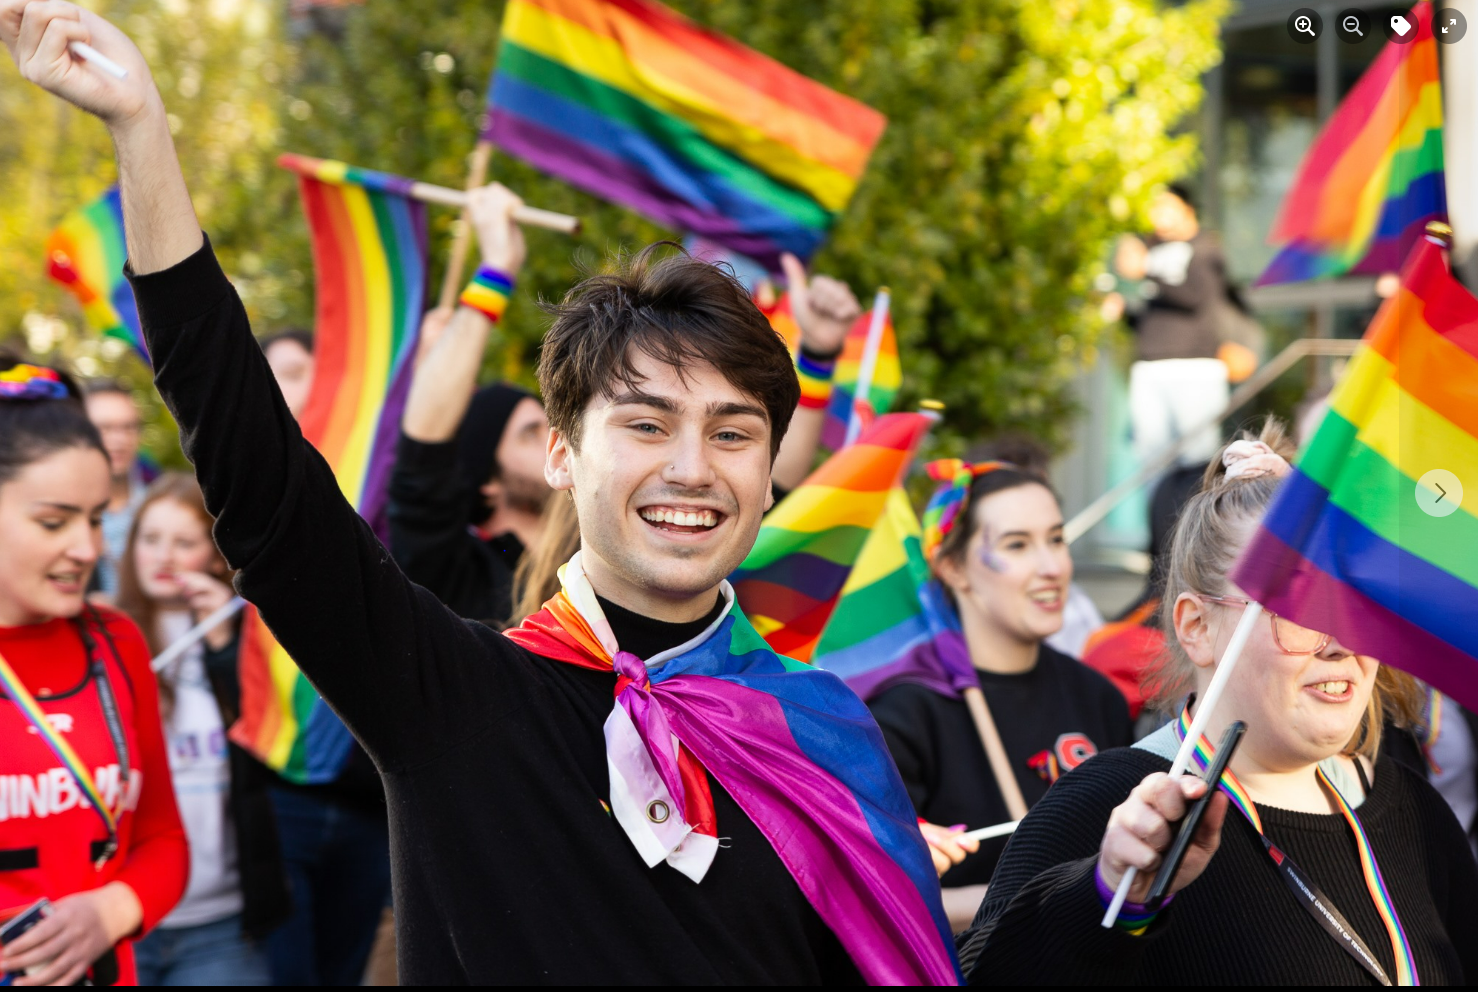 Student wearing long back shirt and wearing rainbow flag tied around his neck 